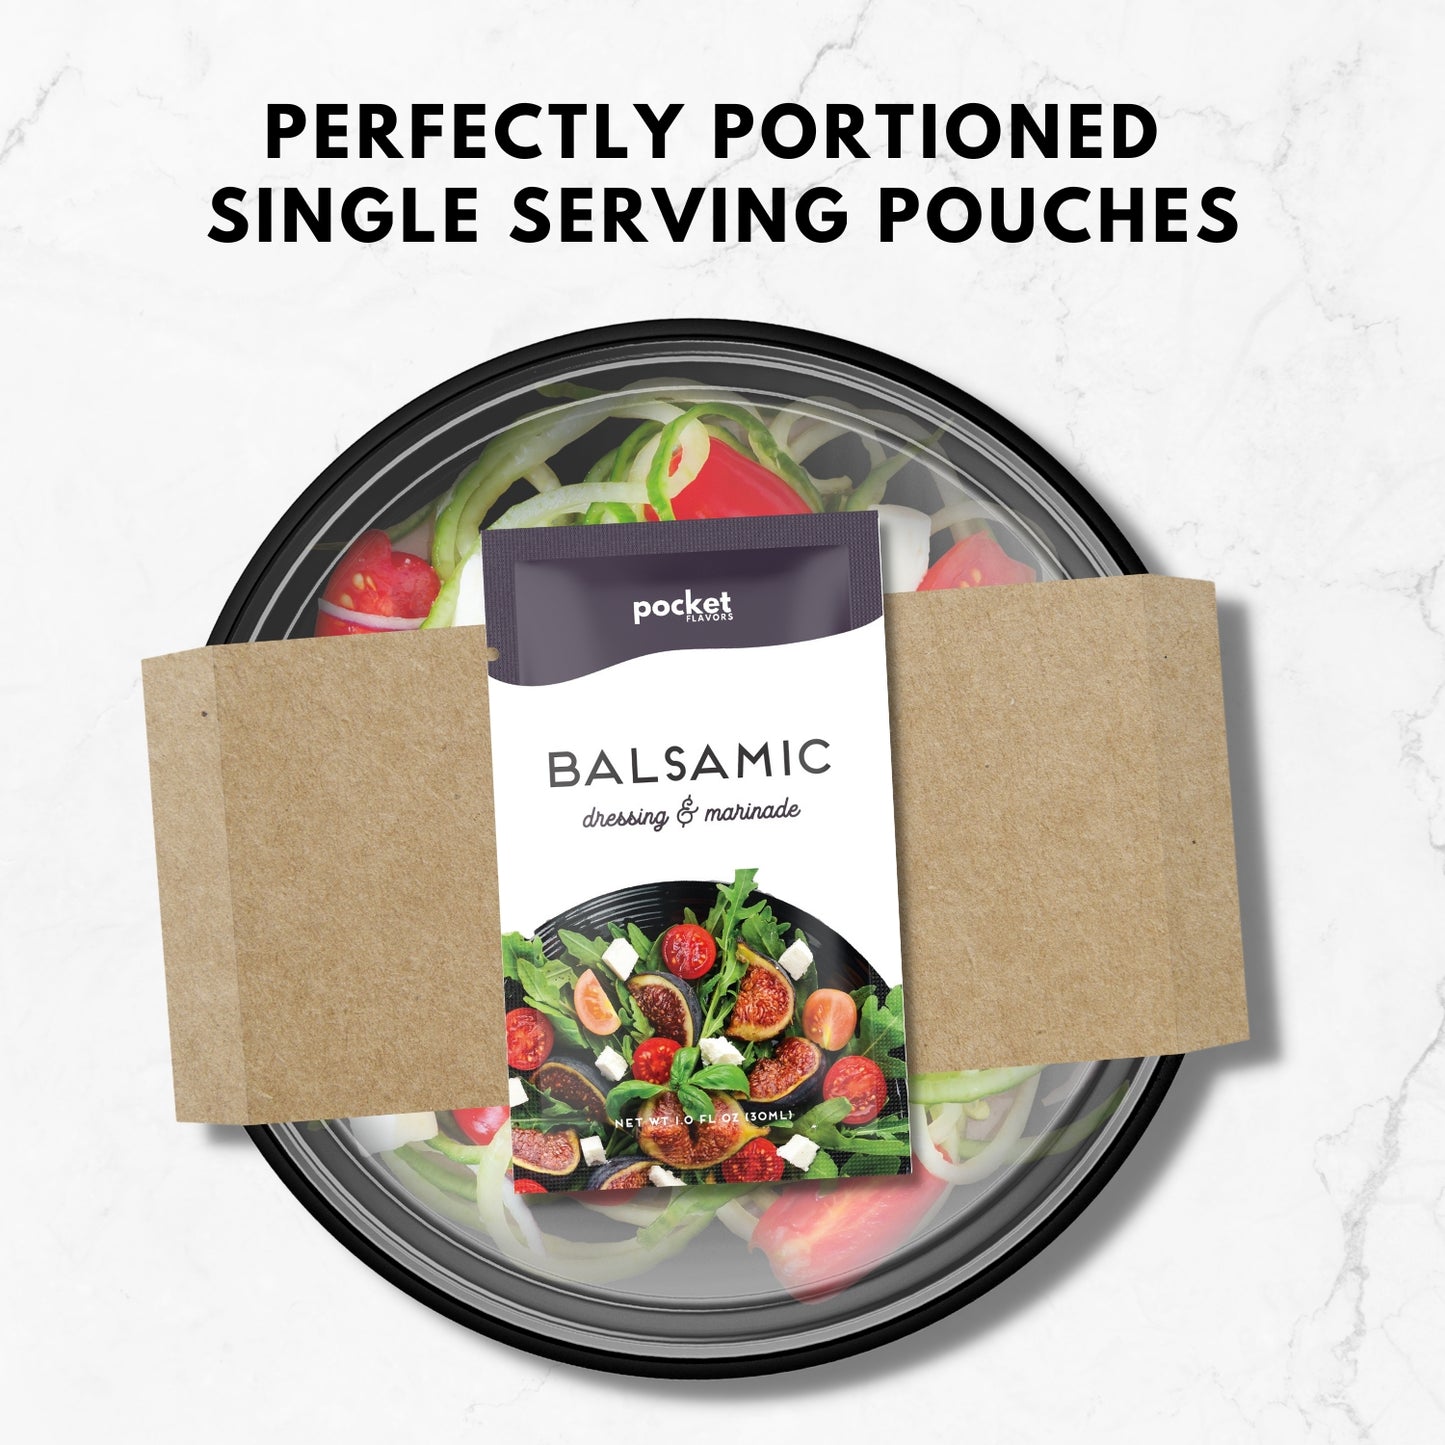 Balsamic single serve salad dressing packet on top of a packaged salad.